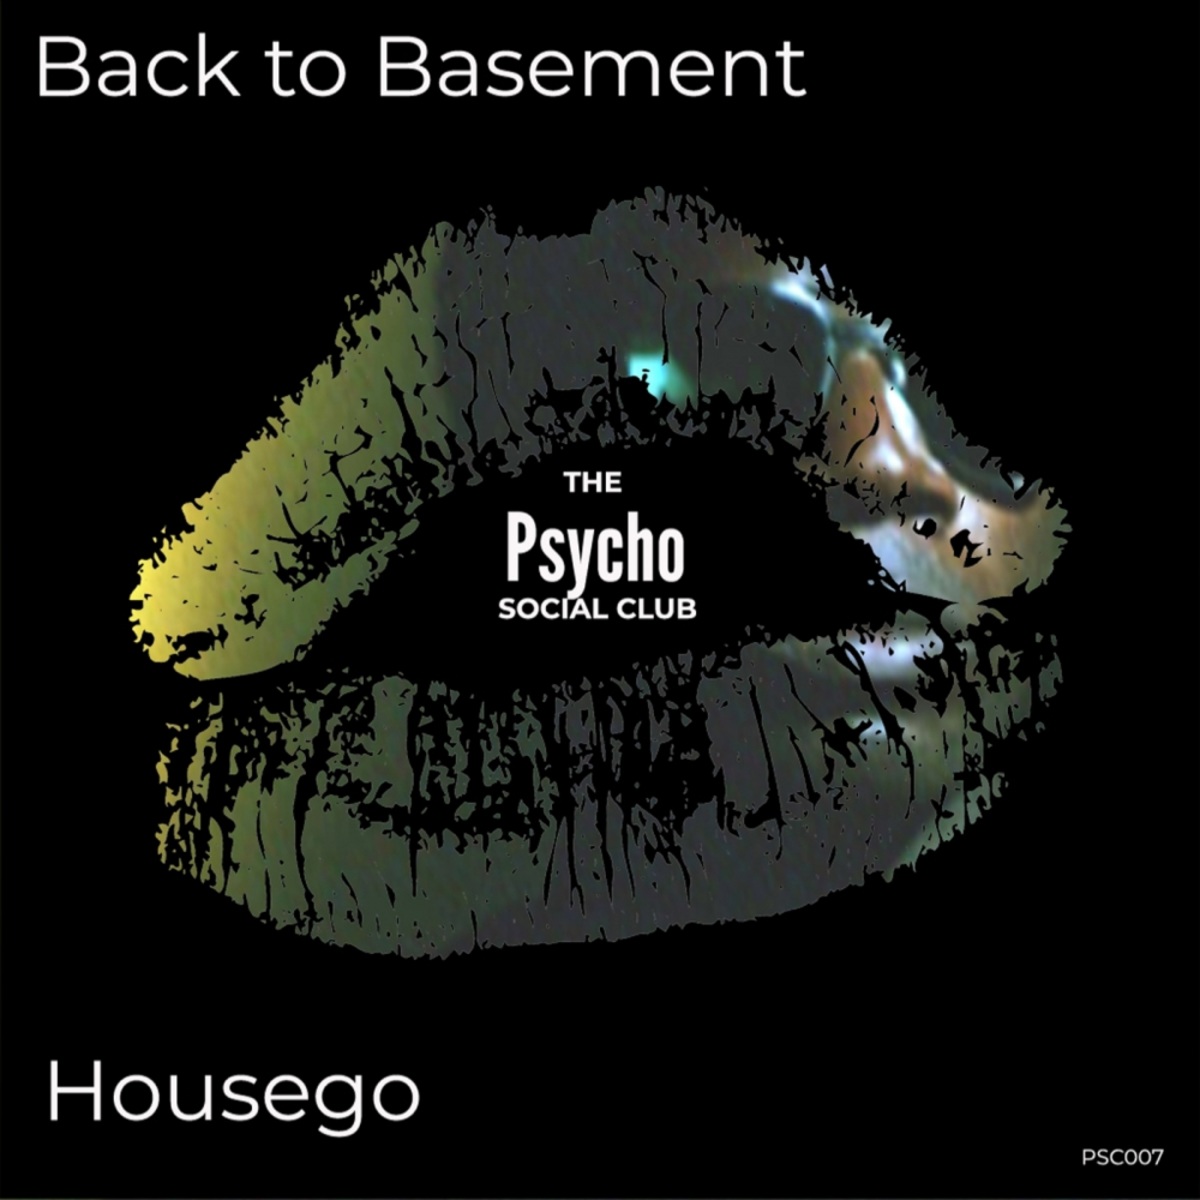 Housego - Back To Basement / The Psycho Social Club